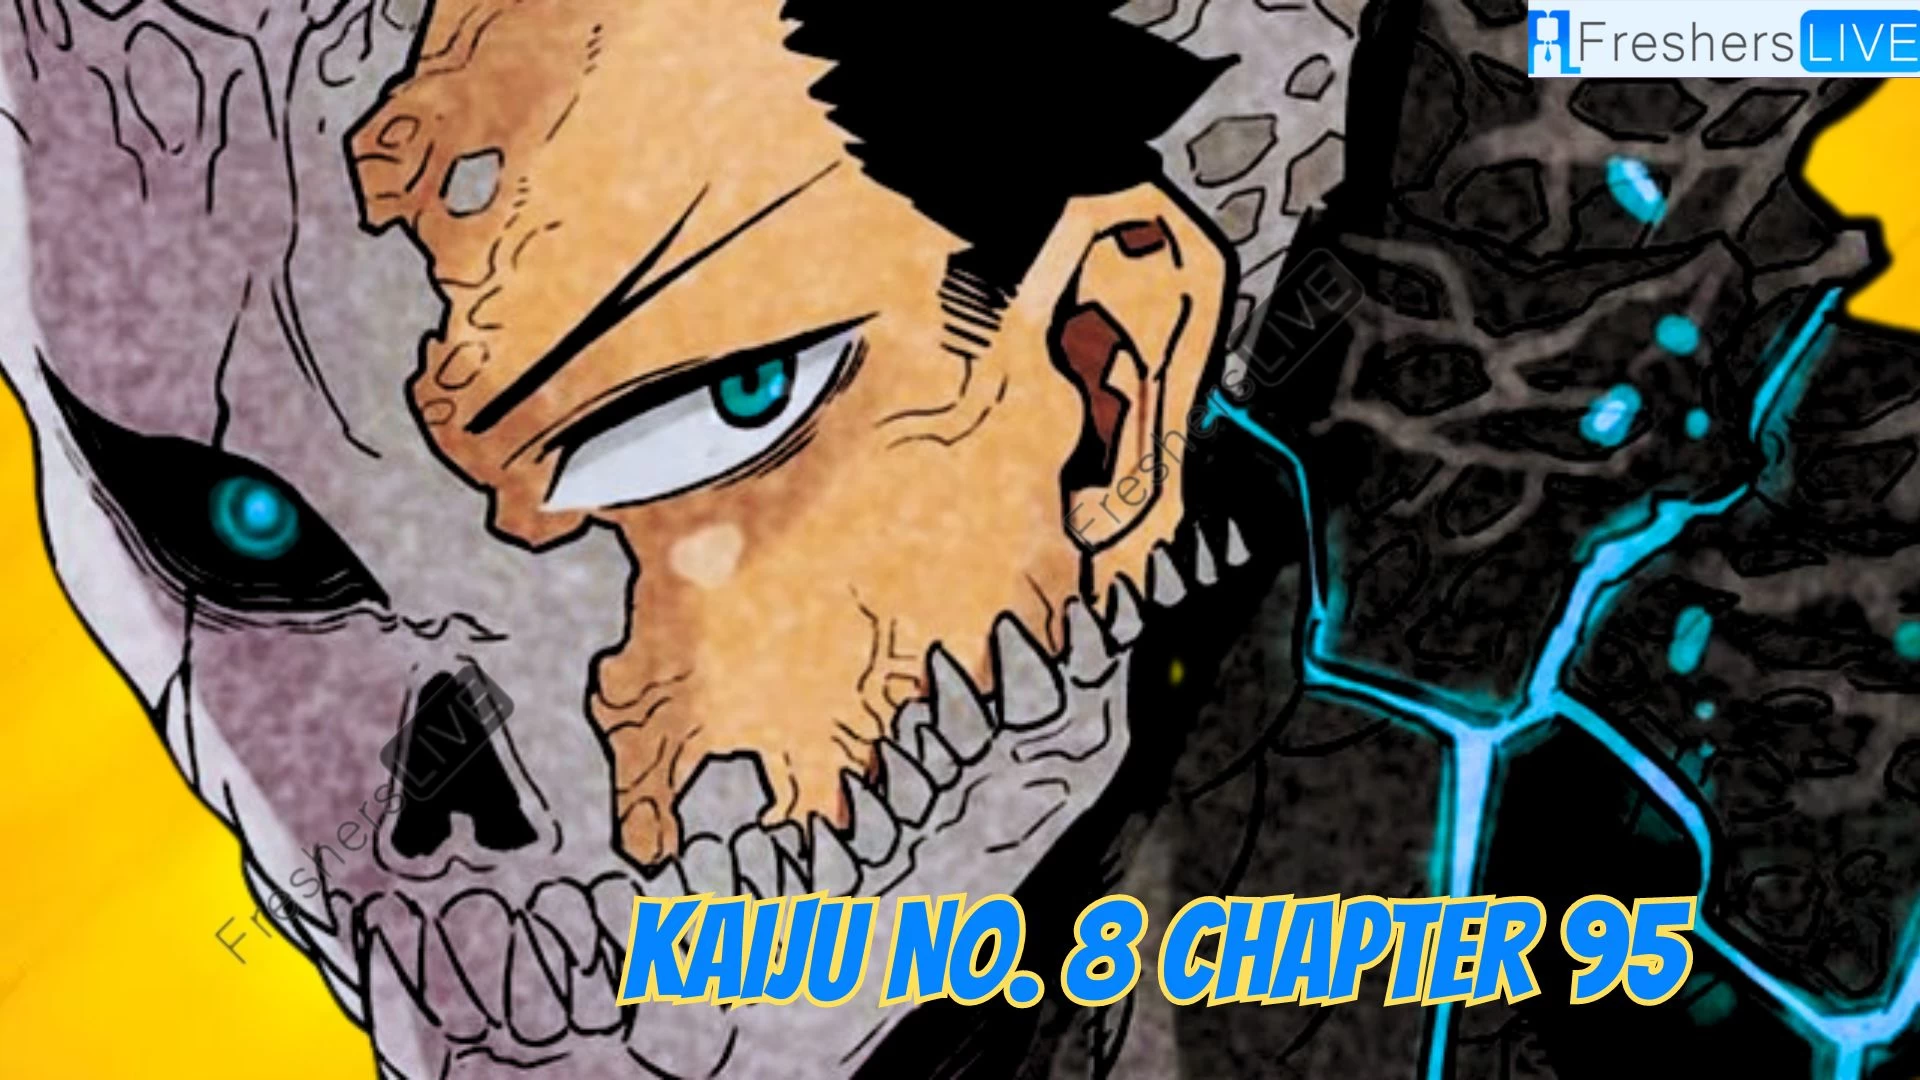 Kaiju No. 8 Chapter 95 Release Date, Spoiler, Recap, Raw Scan, and More